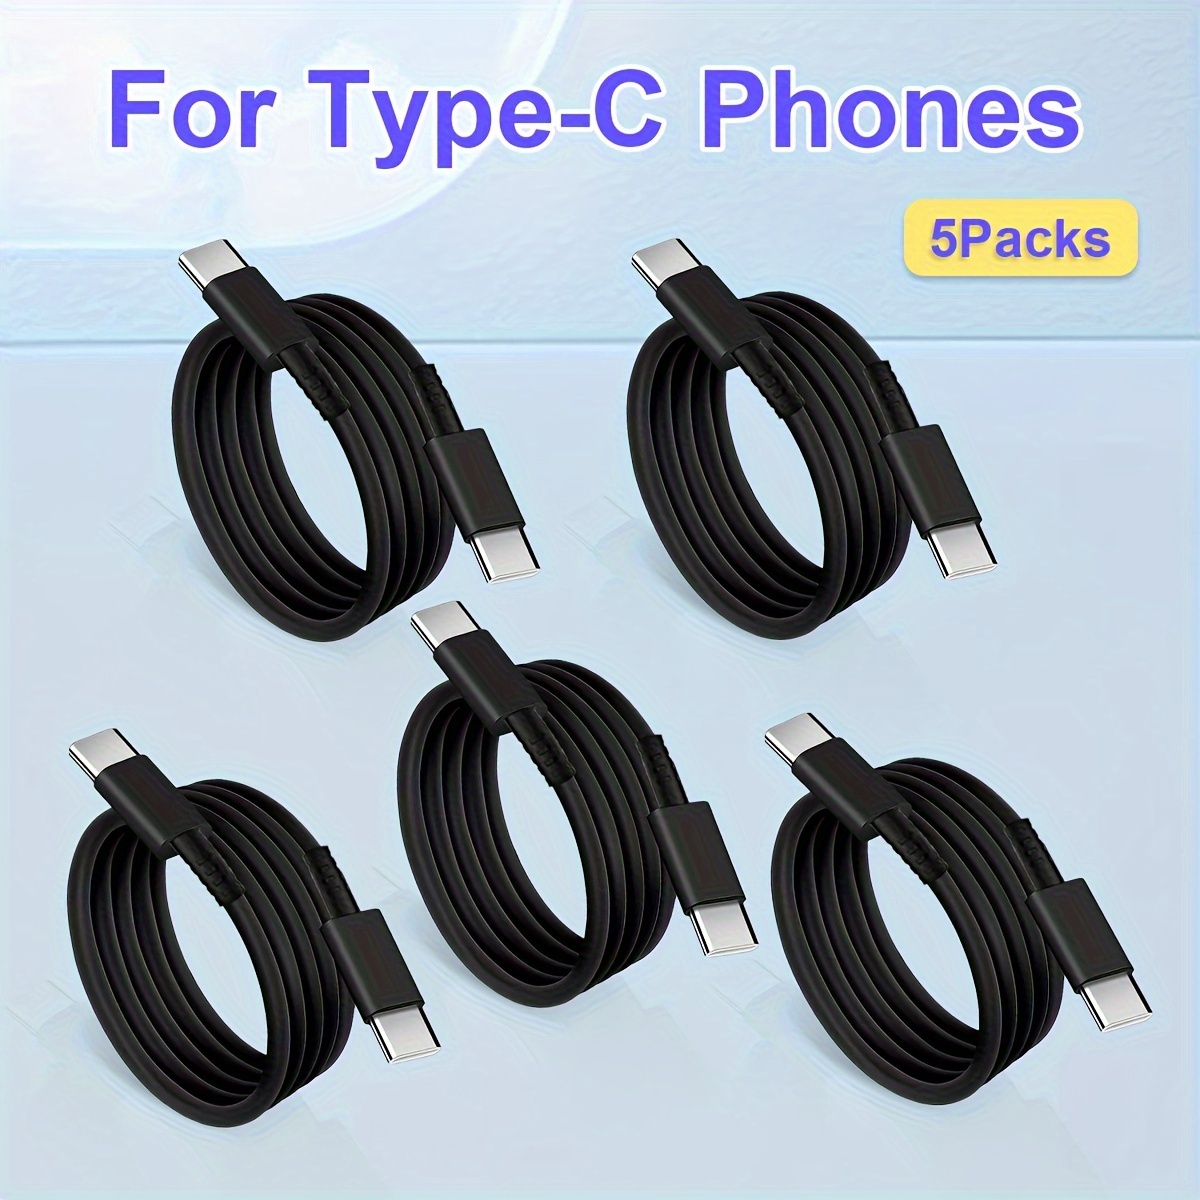 Charging Cable Magnetic Charger Cord For iPhone Samsung Type-C Micro USB